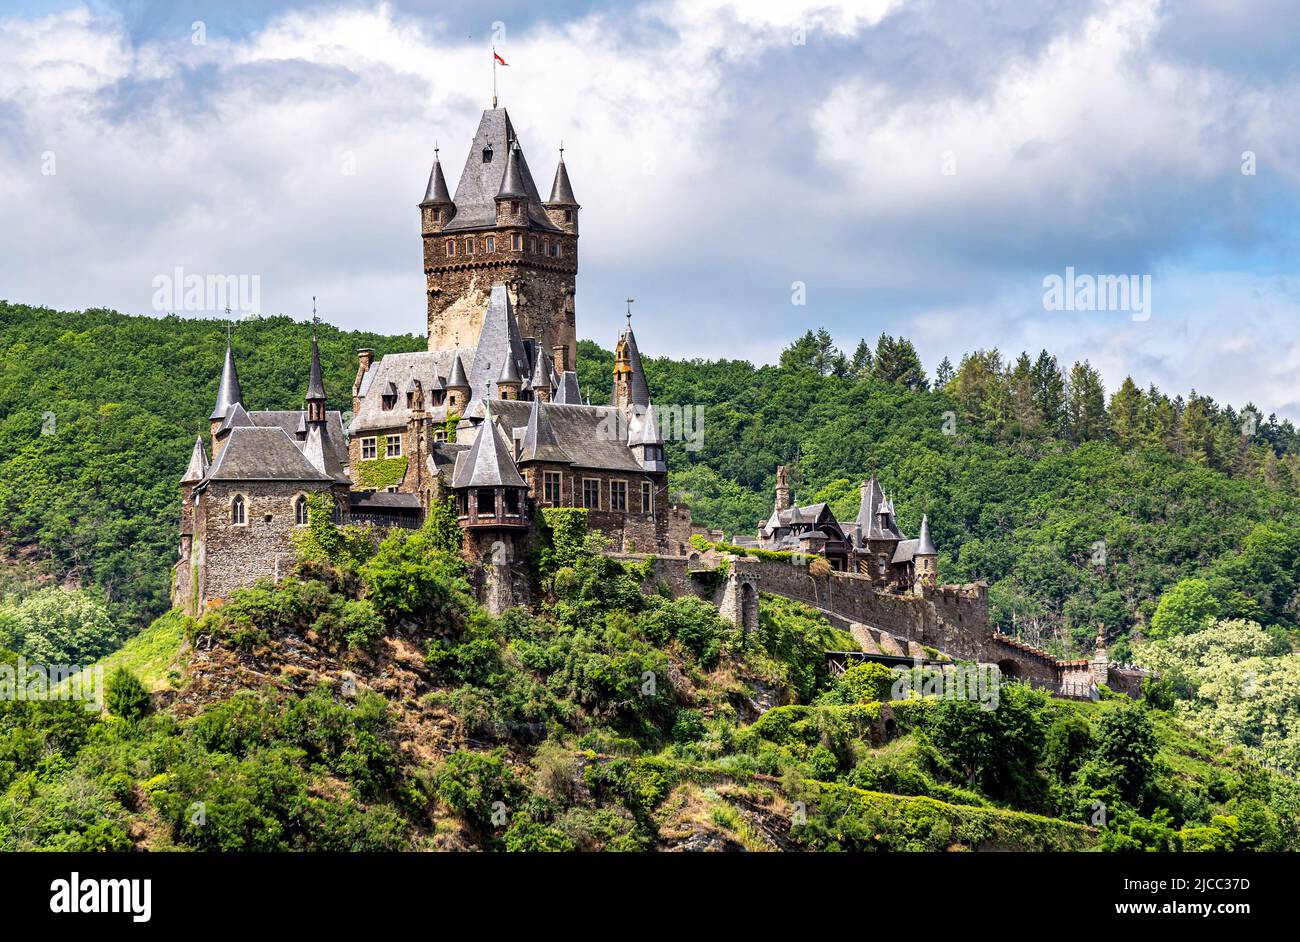 The Reichsburg Cochem (Imperial Castle Cochem) on a hill over the Moselle river. The Reichsburg Cochem had its first documentary mention in 1130. Stock Photo